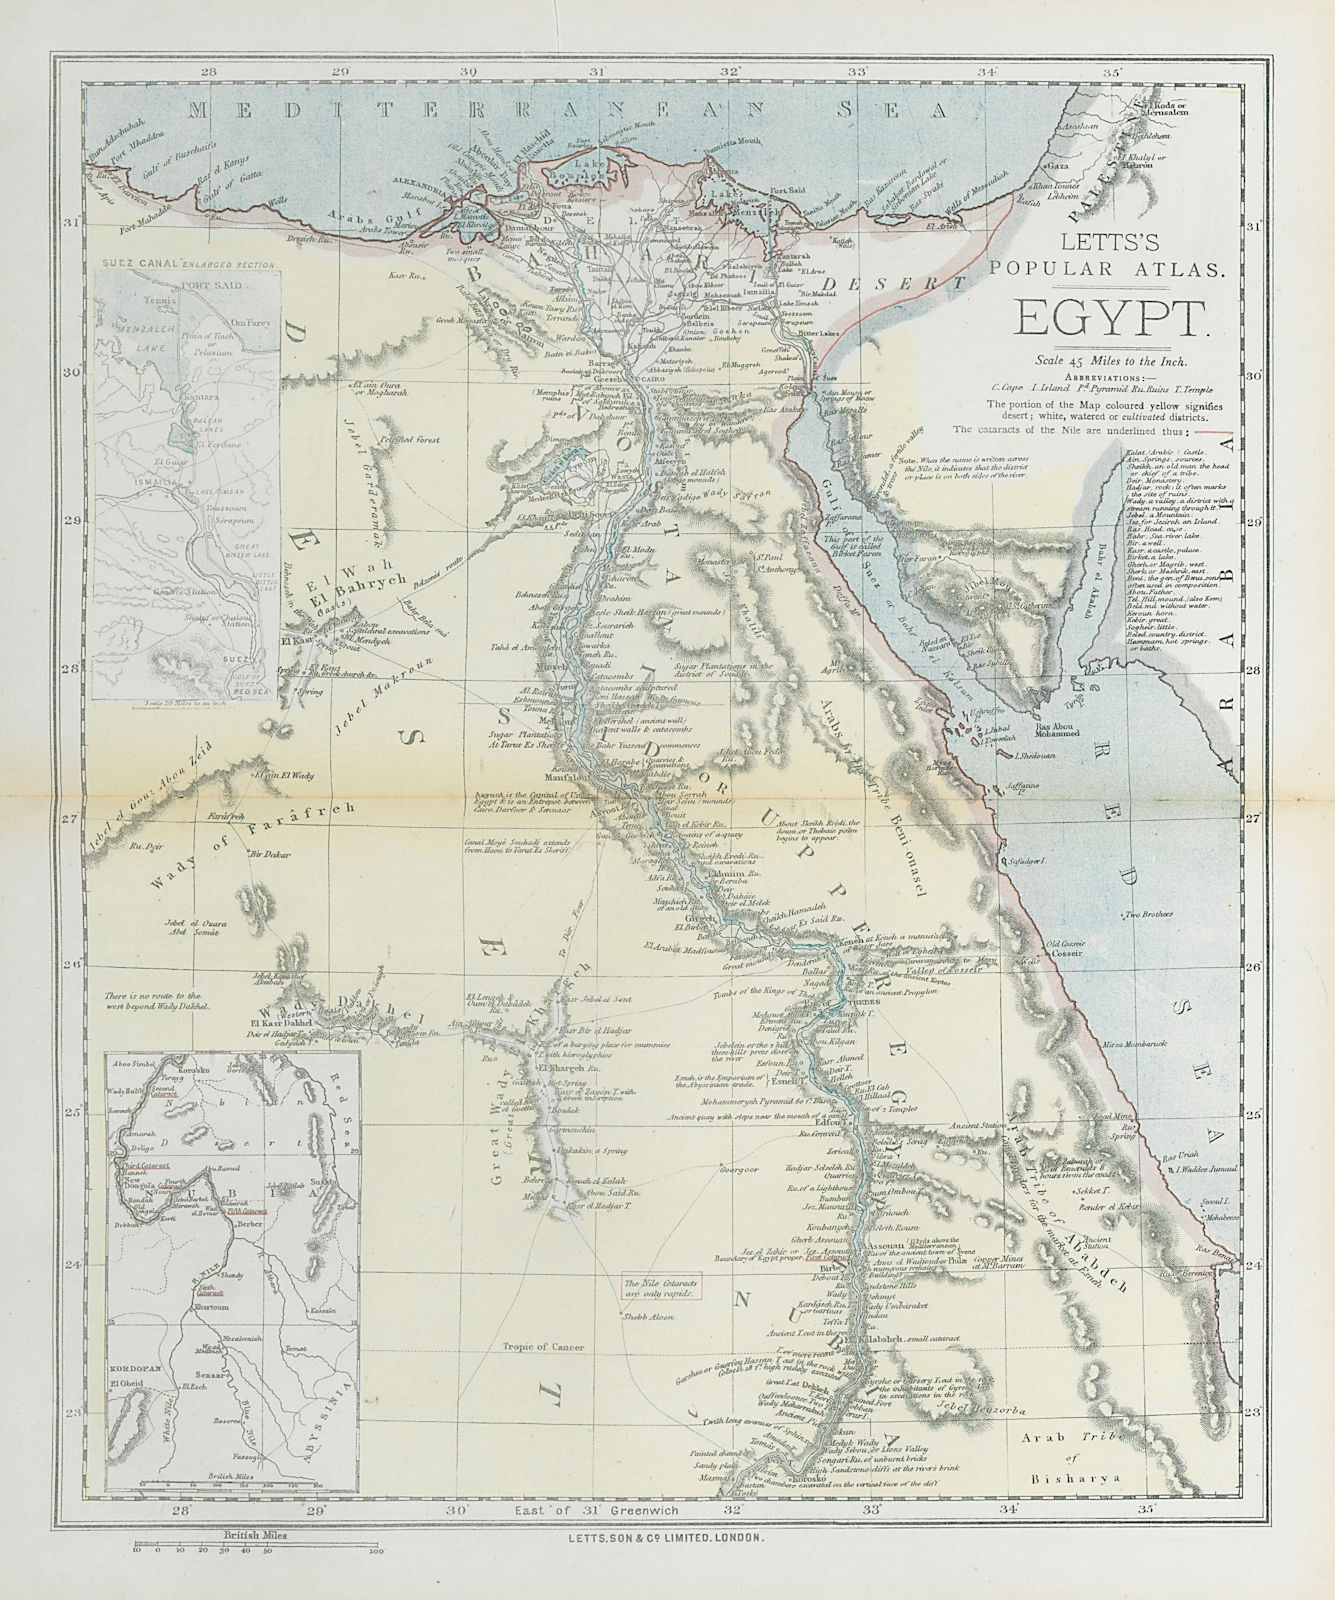 Associate Product EGYPT. Nile valley. Suez Canal. Red Sea. 'Sherm'/Sharm el-Sheikh. LETTS 1883 map